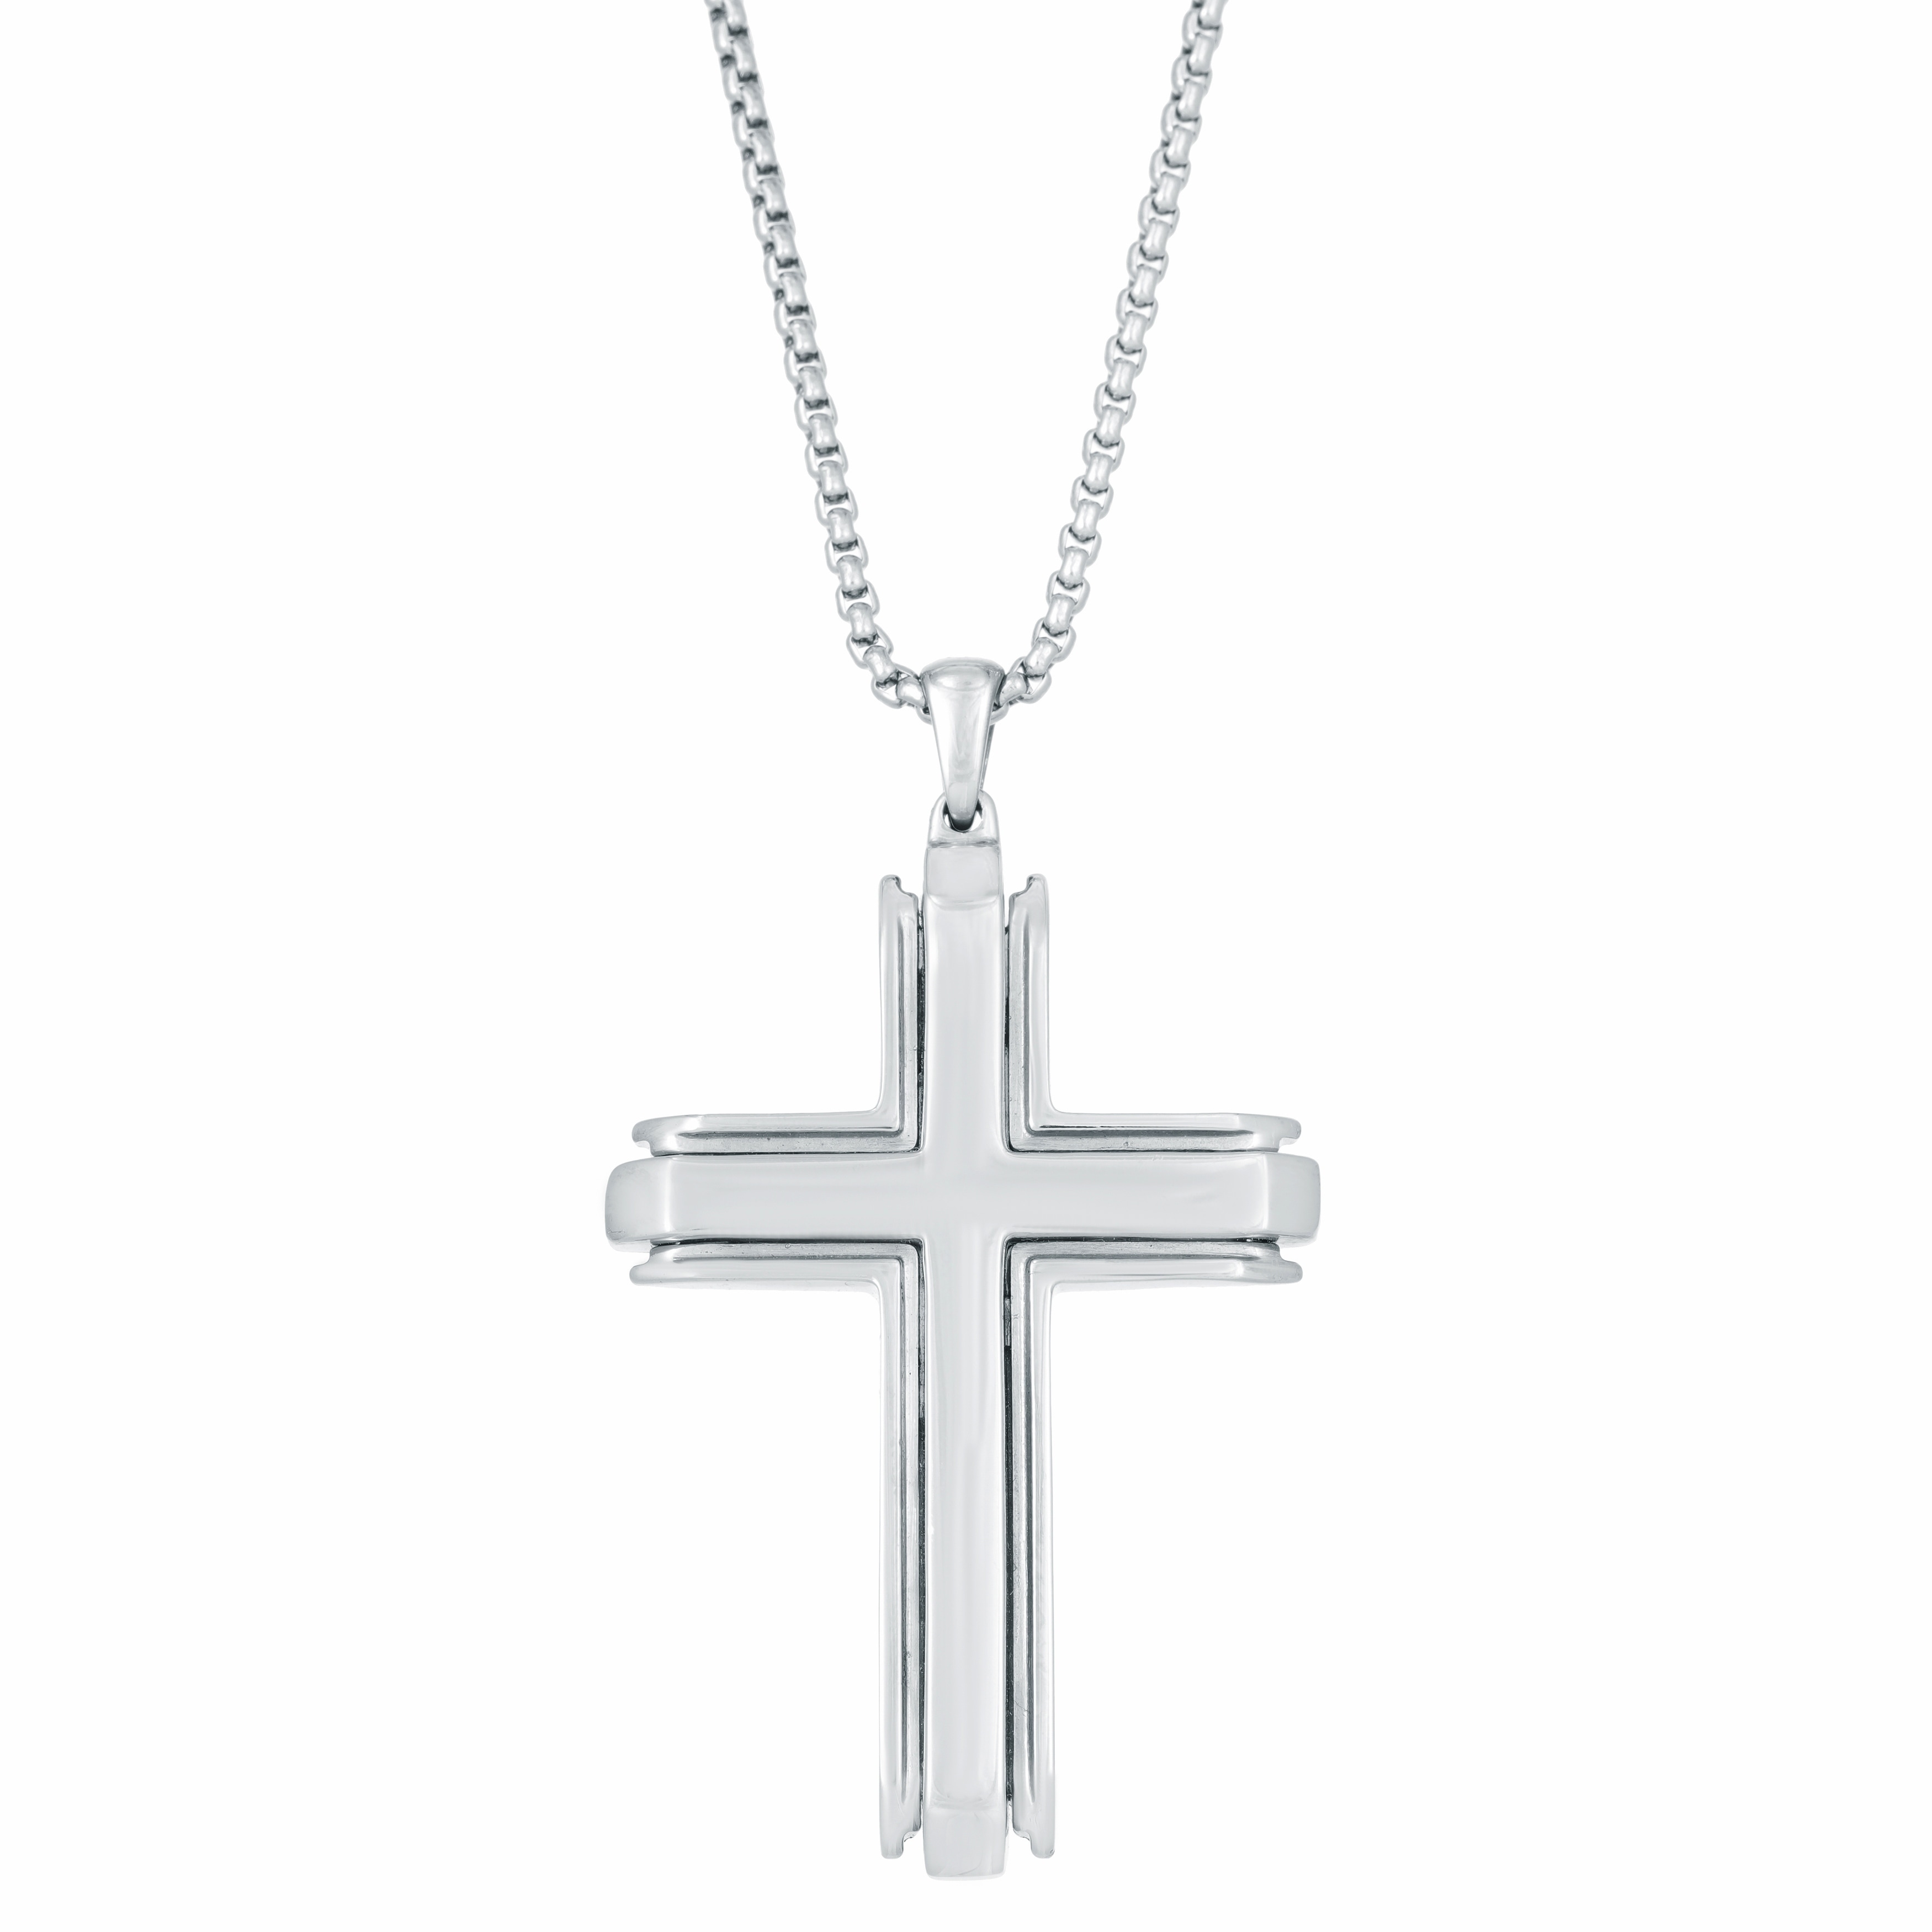 Details about  / Silver Antique Beveled Designed Cross Pendant with 18/" Box Chain Necklace